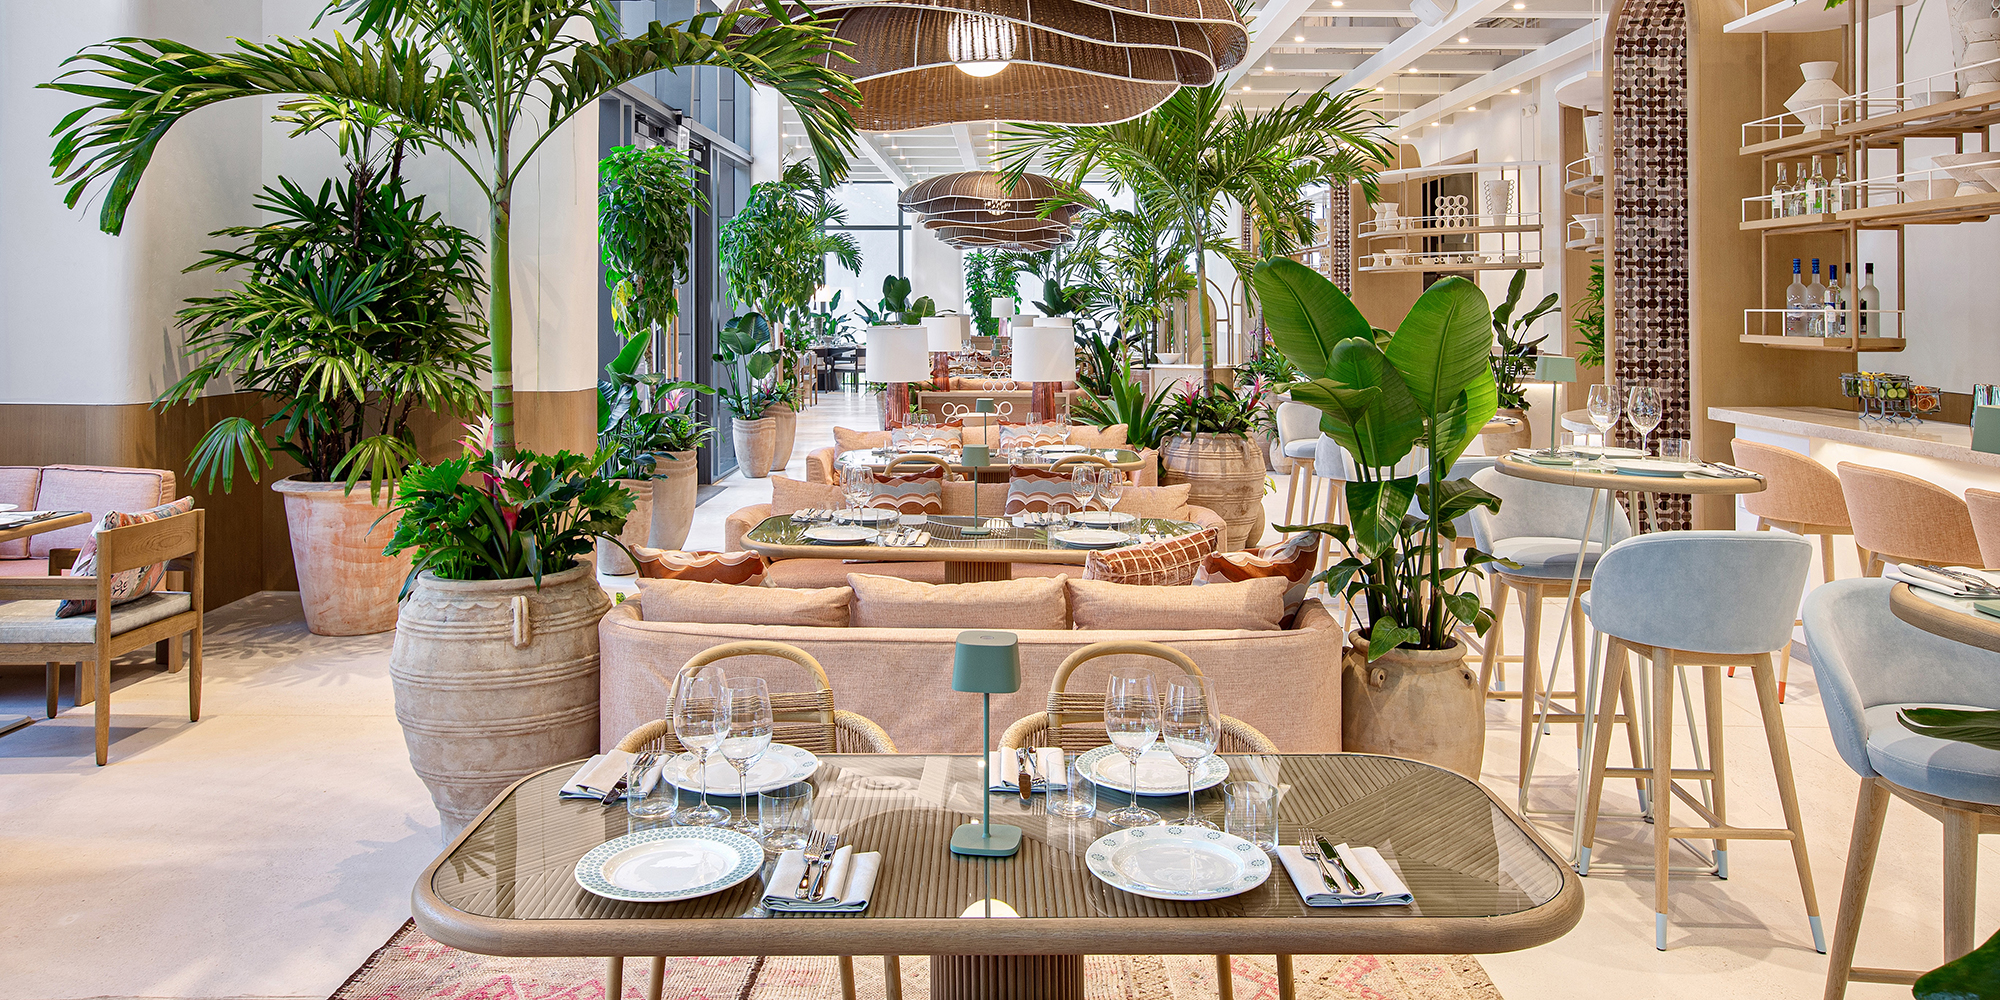 Nestled in Miami's vibrant Coconut Grove, Amal connects locals and travellers alike in the discovery of Lebanese Cuisine.